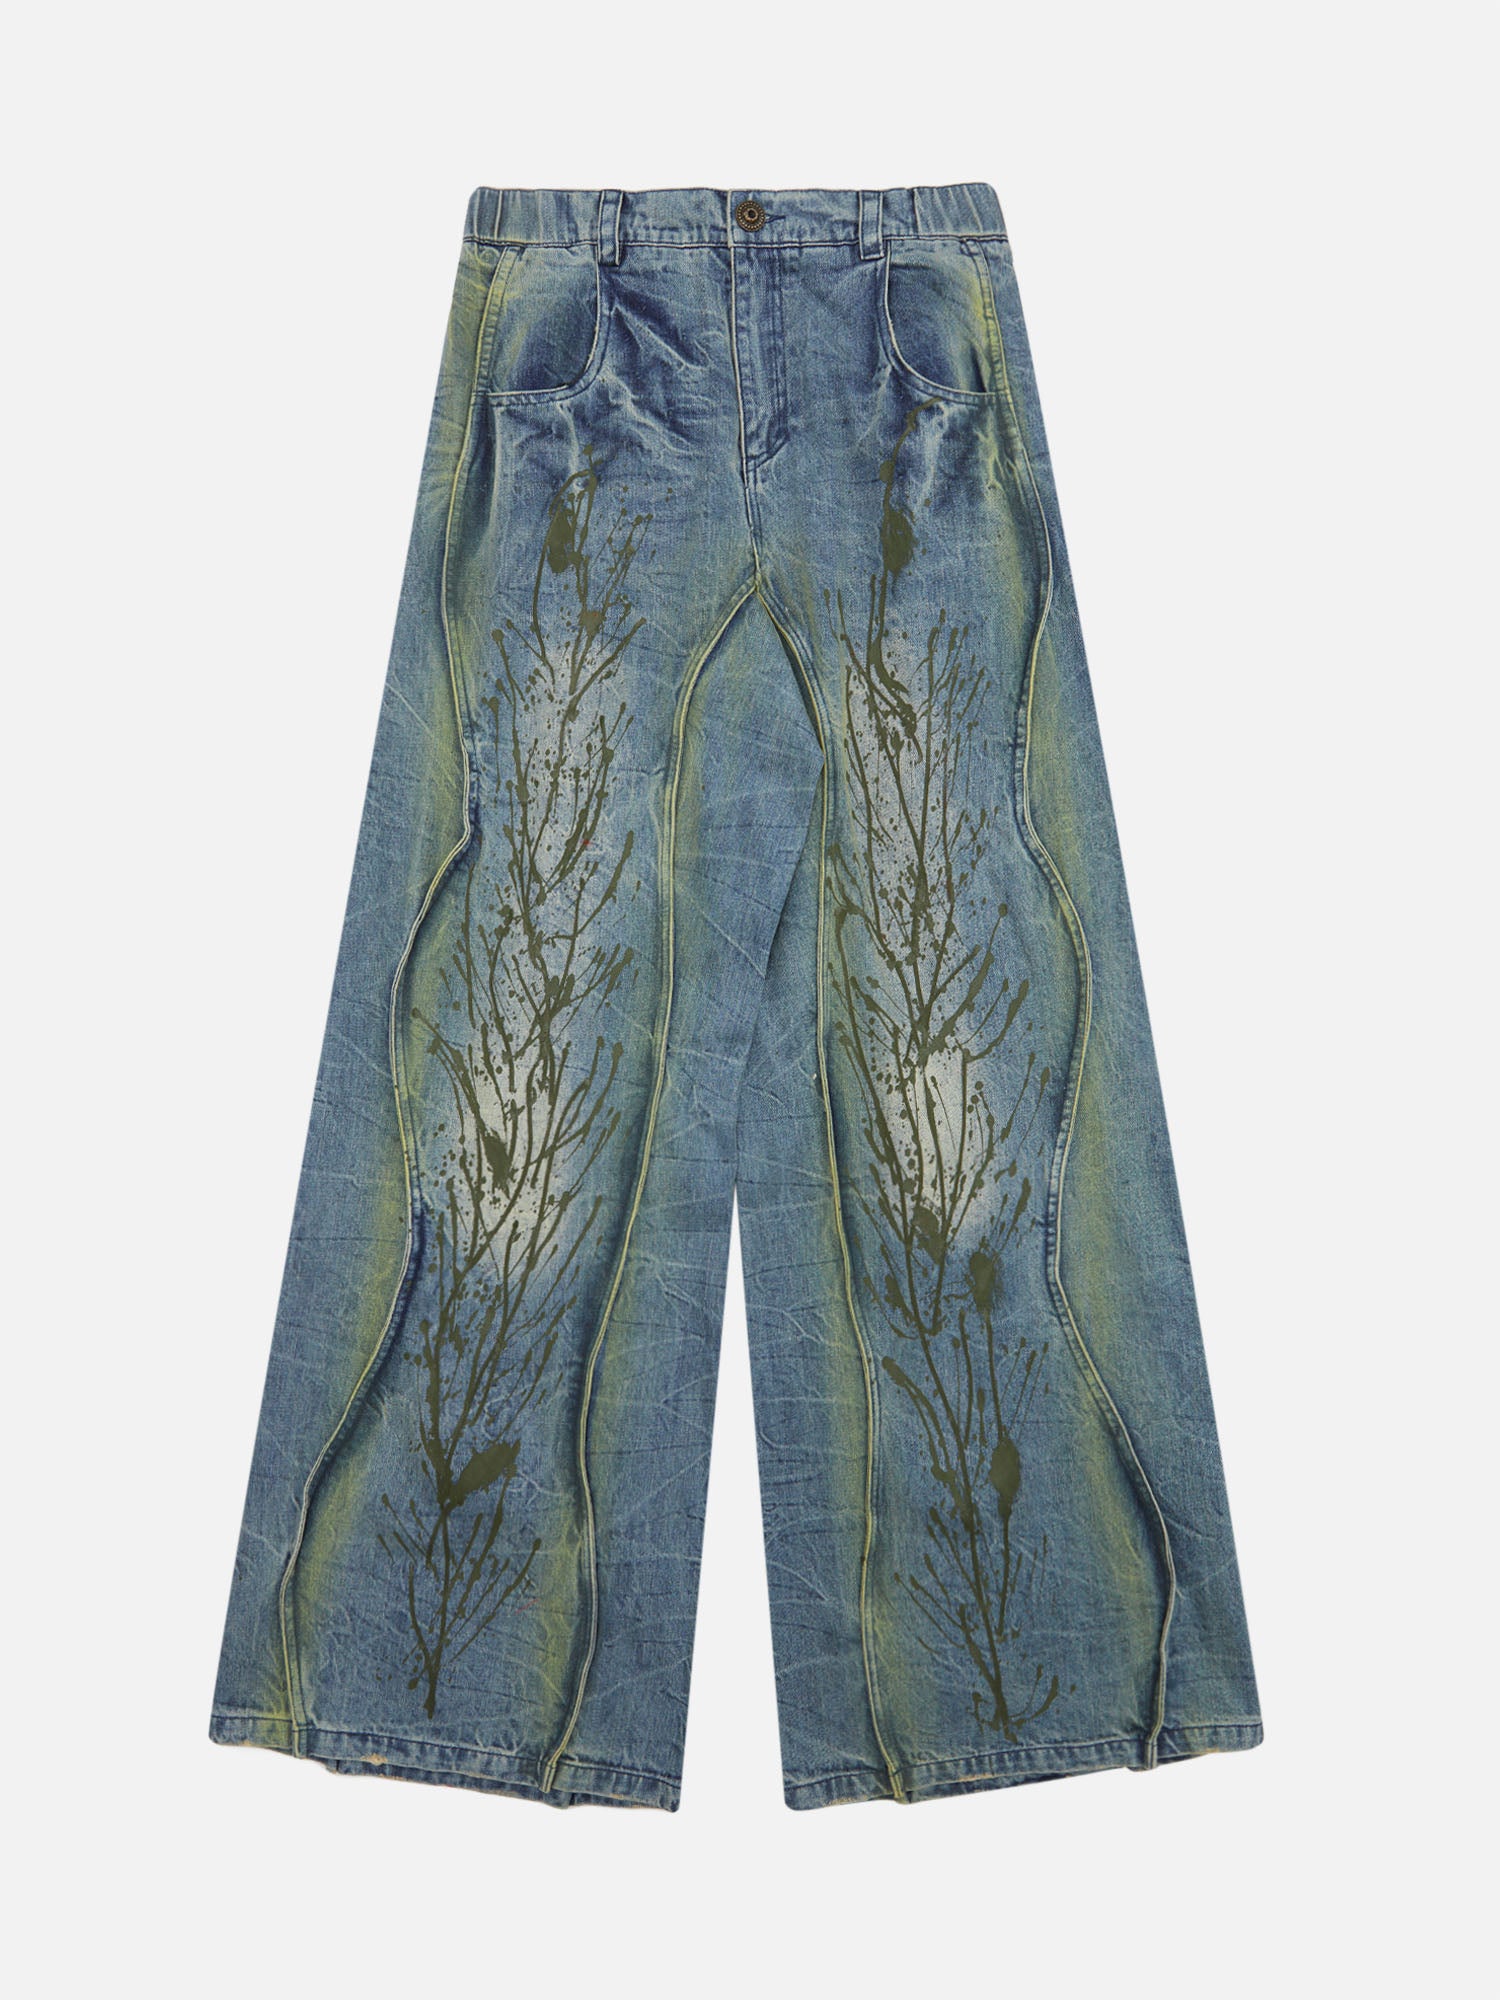 American Street Heavy Duty Washed Distressed Jeans